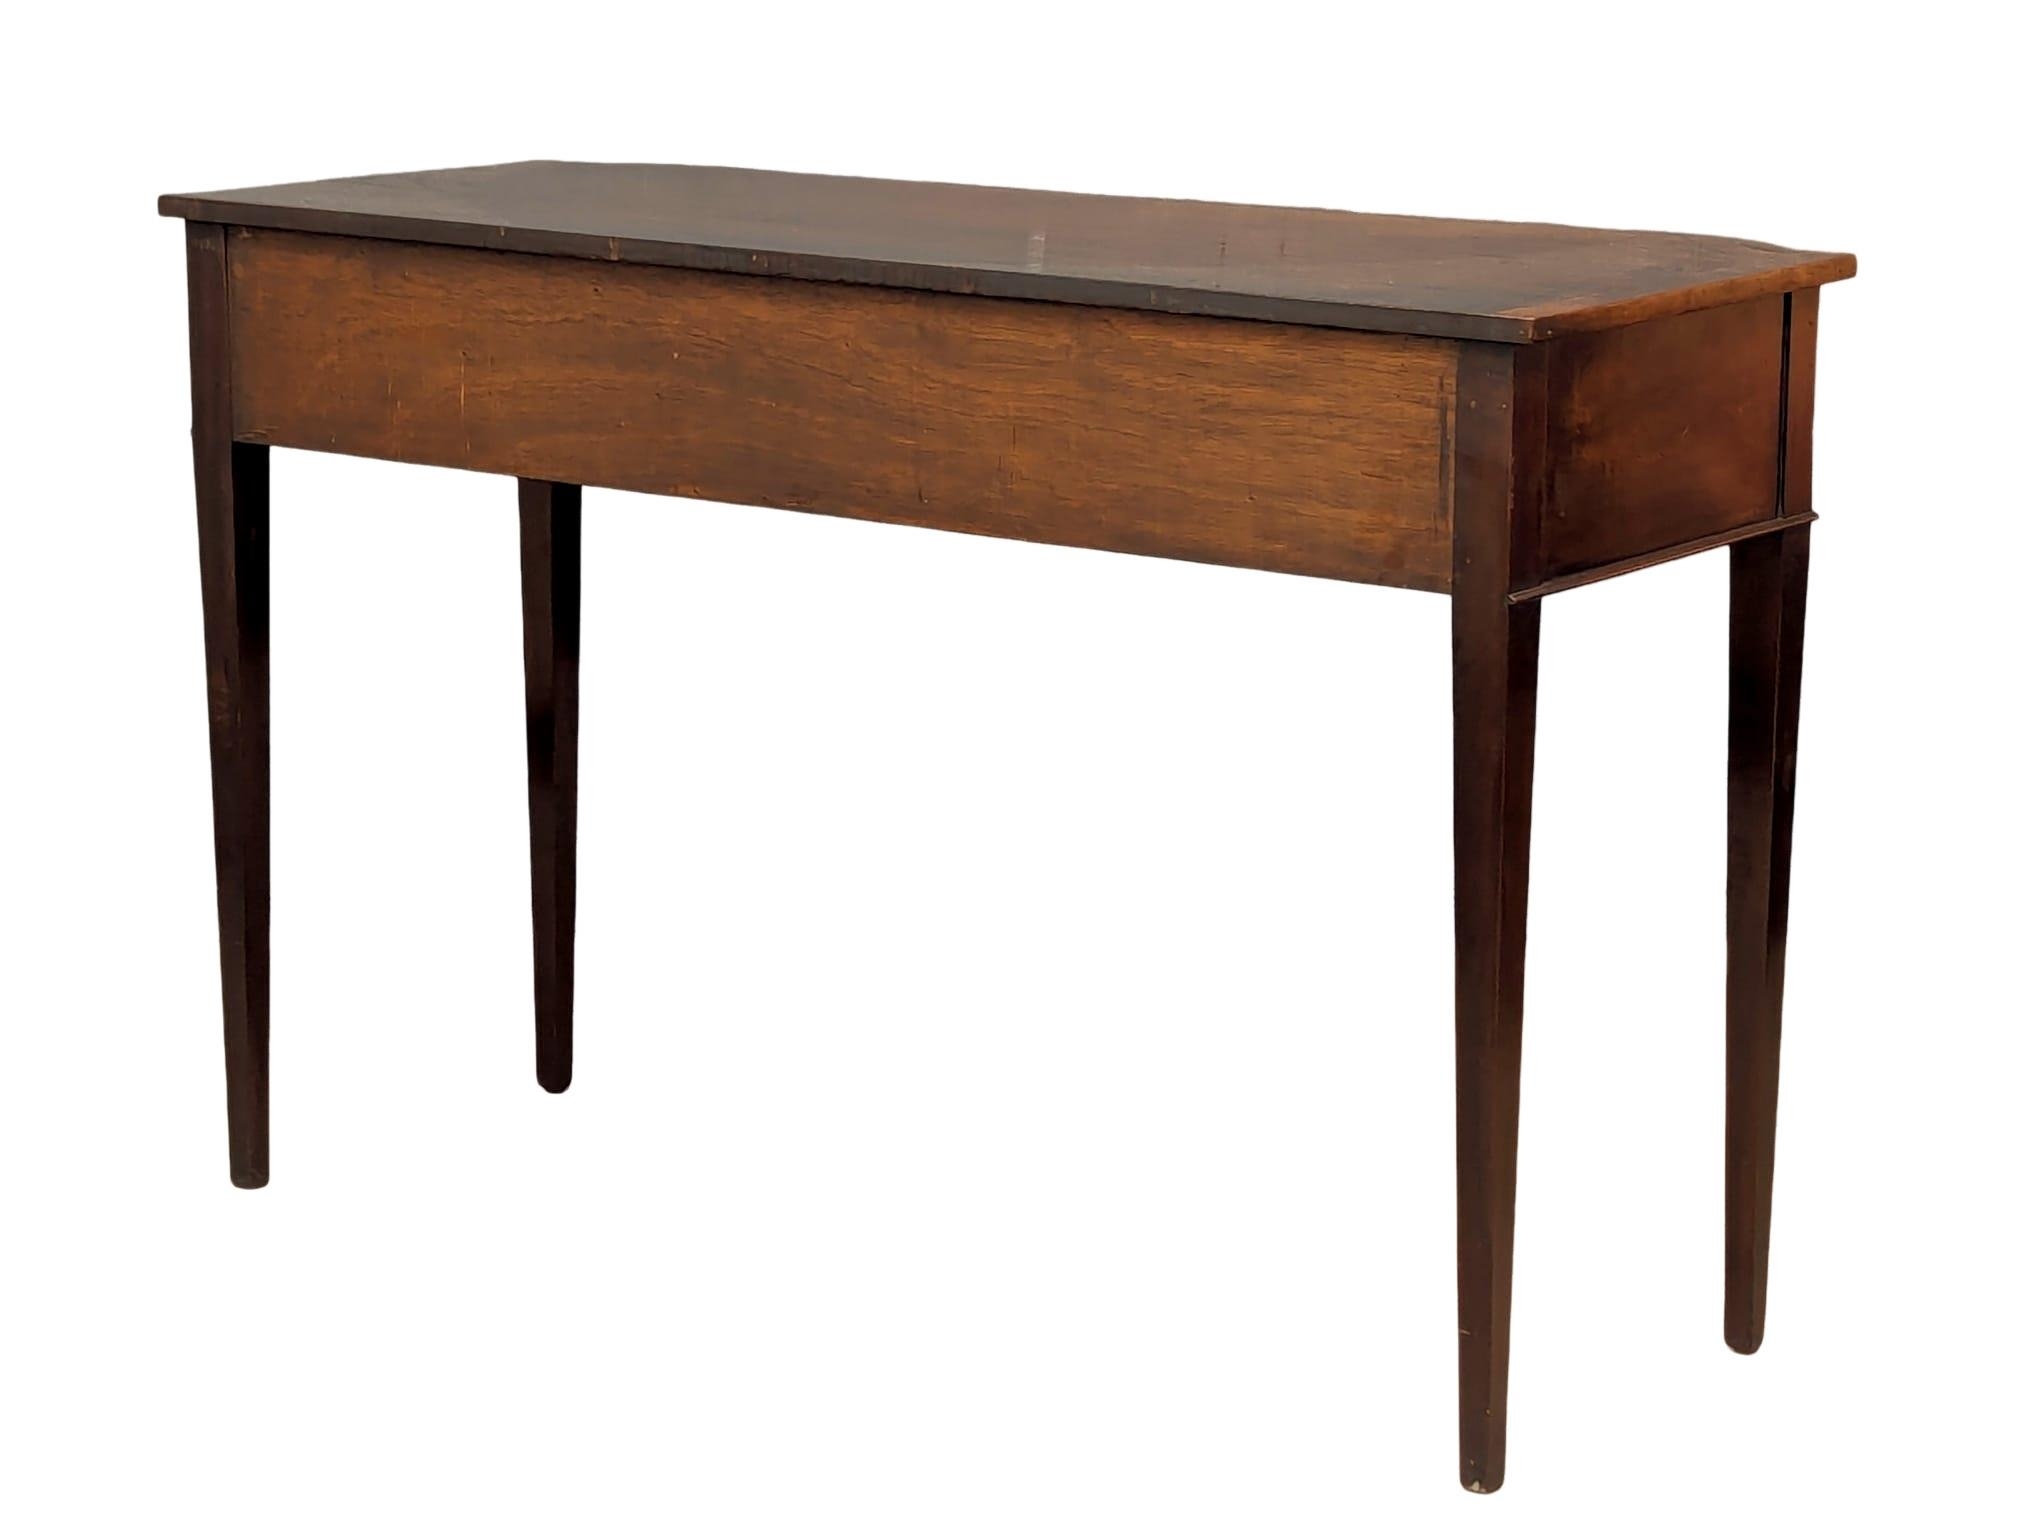 An early 20th Century inlaid mahogany console table in Hepplewhite style, 130cm x 52cm x 84cm - Image 5 of 6